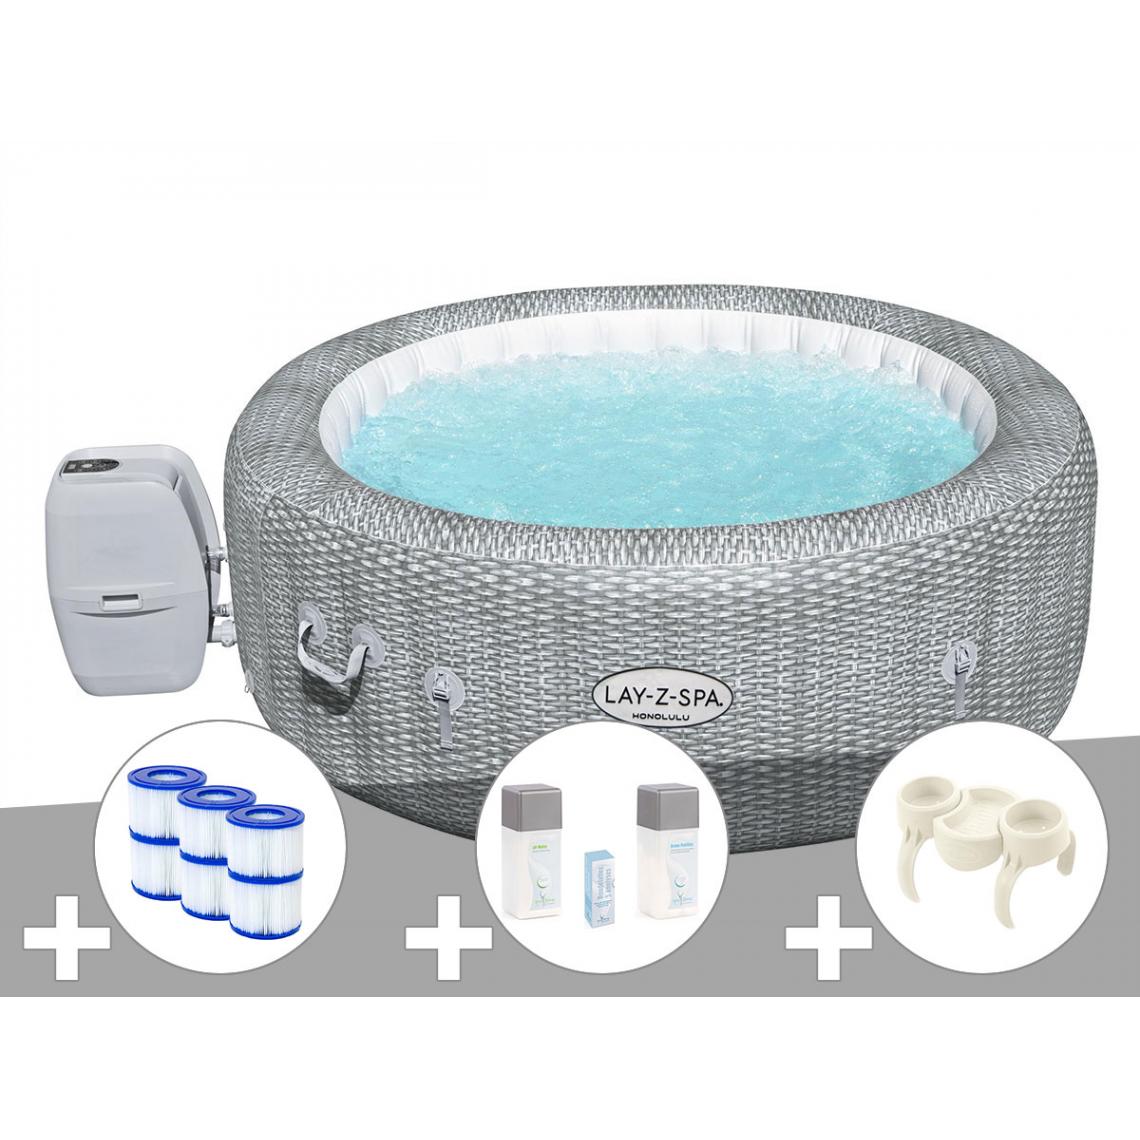 Bestway - Kit spa gonflable Bestway Lay-Z-Spa Honolulu rond Airjet 4/6 places + 6 filtres + Kit traitement brome + Porte-gobelets - Spa gonflable